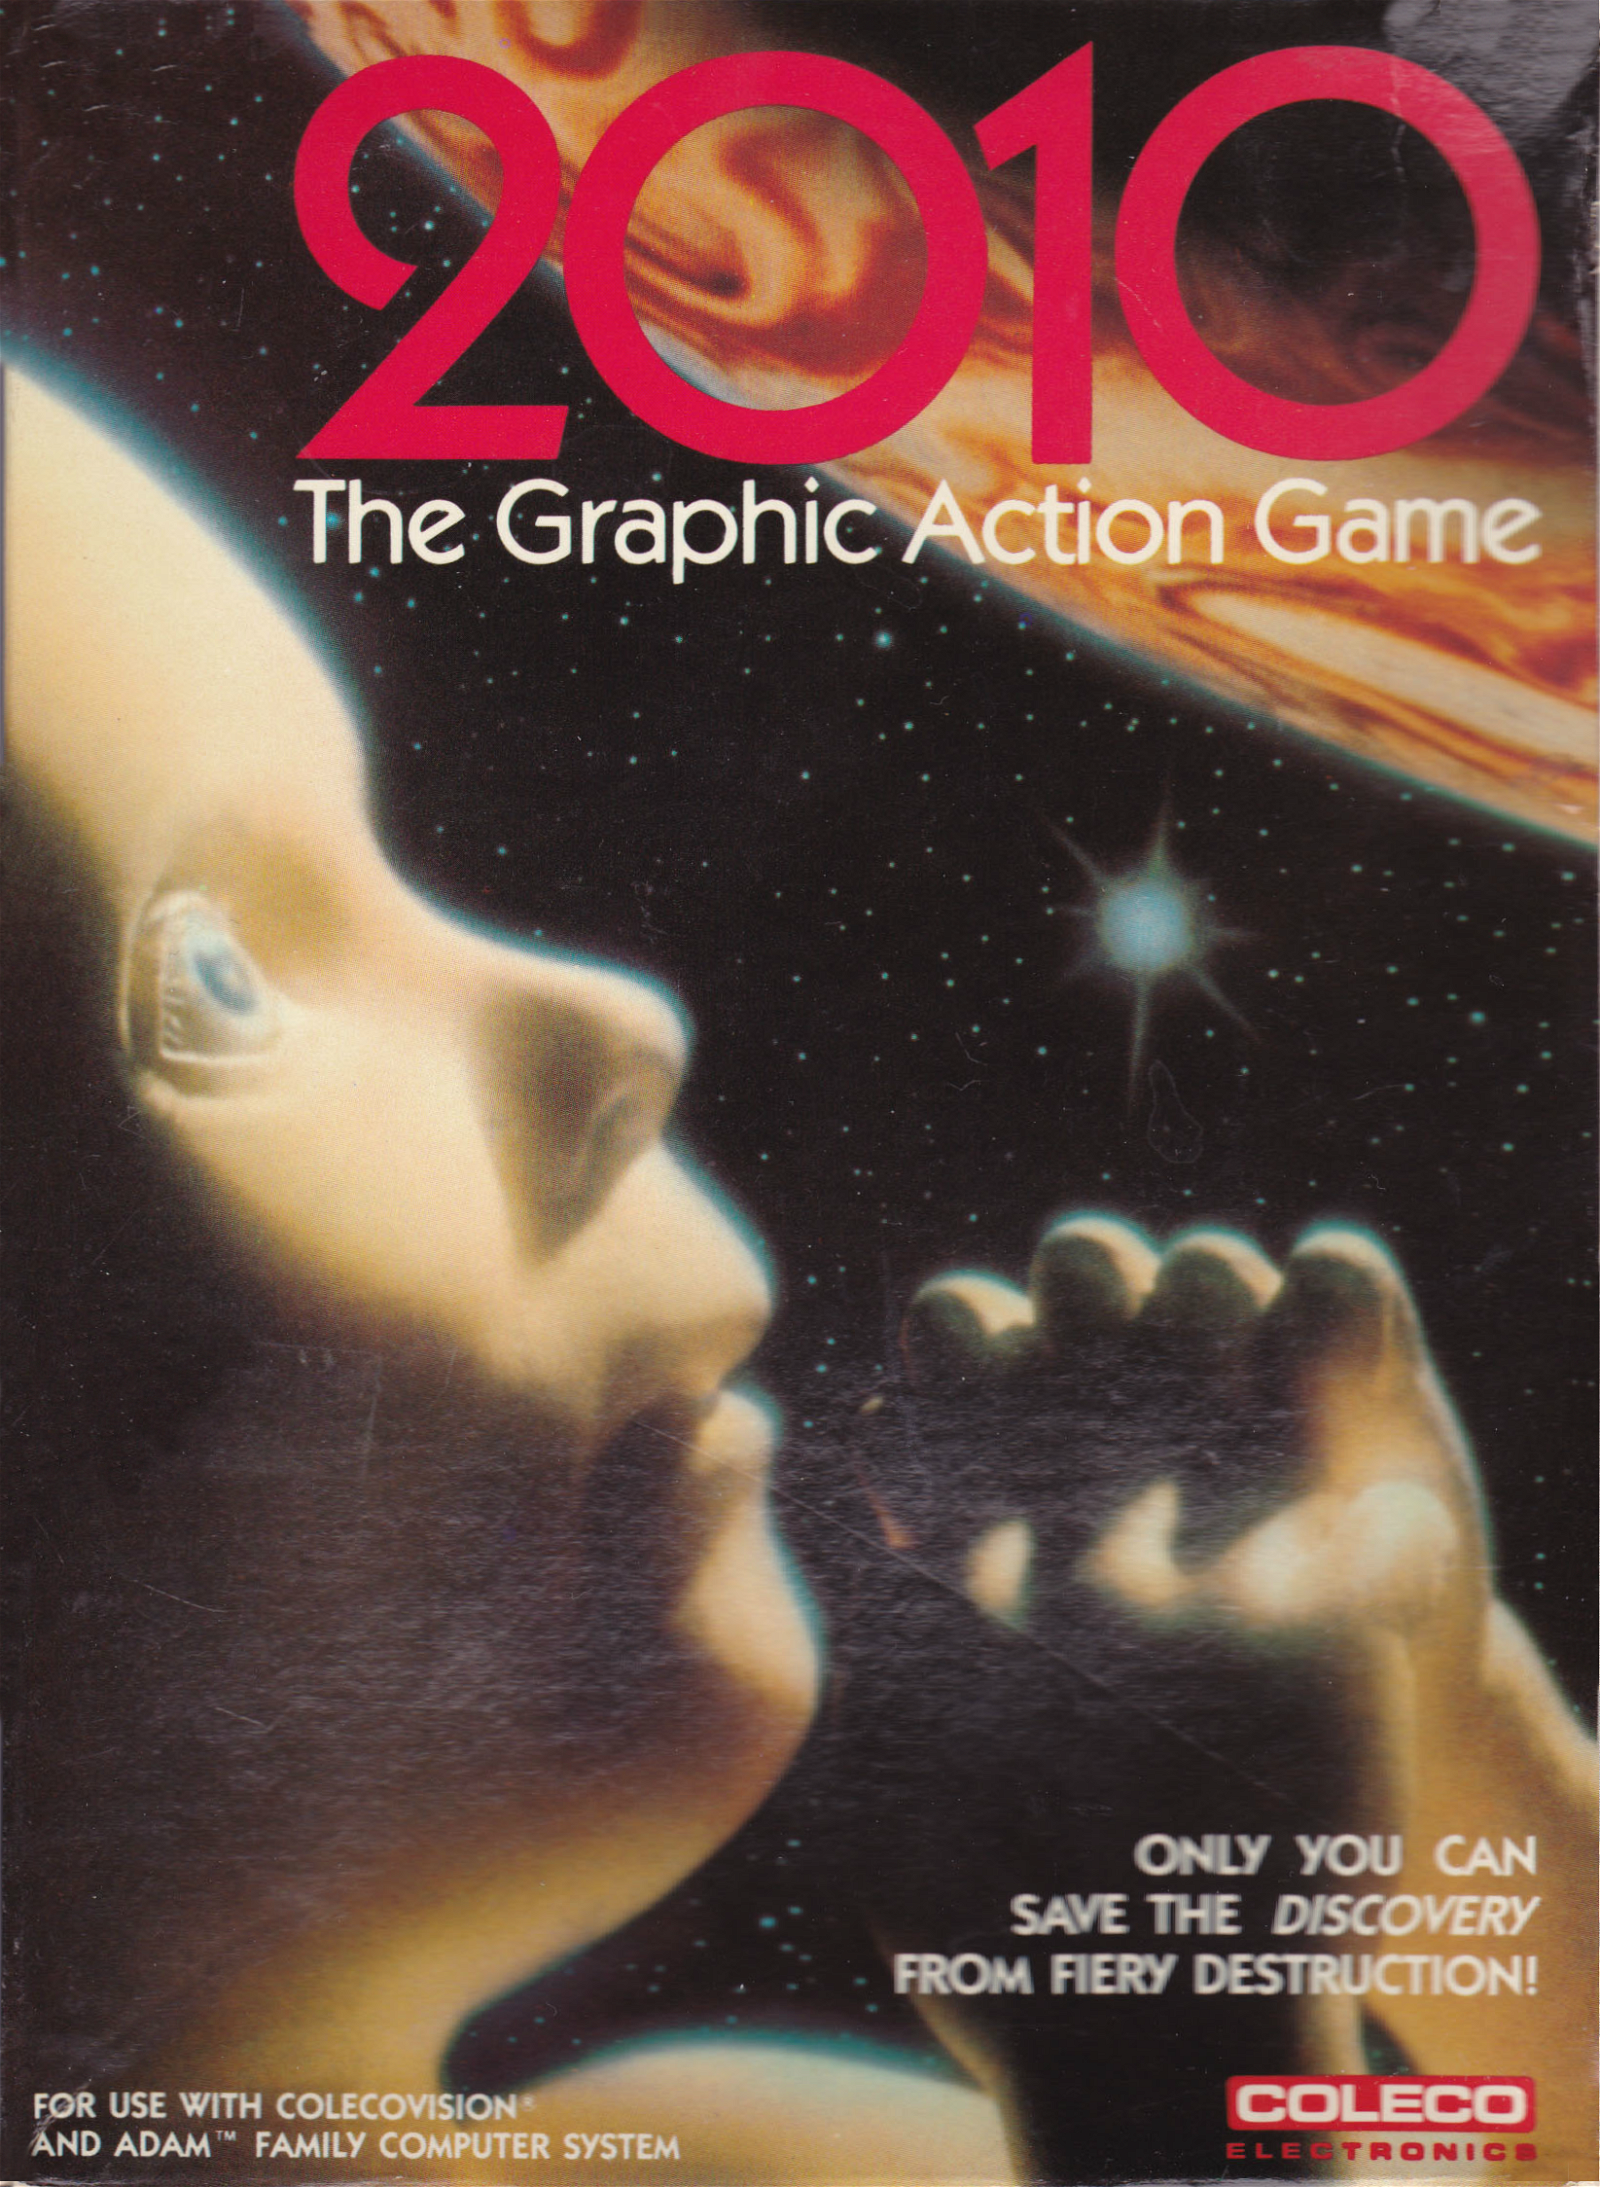 Image of 2010: The Graphic Action Game